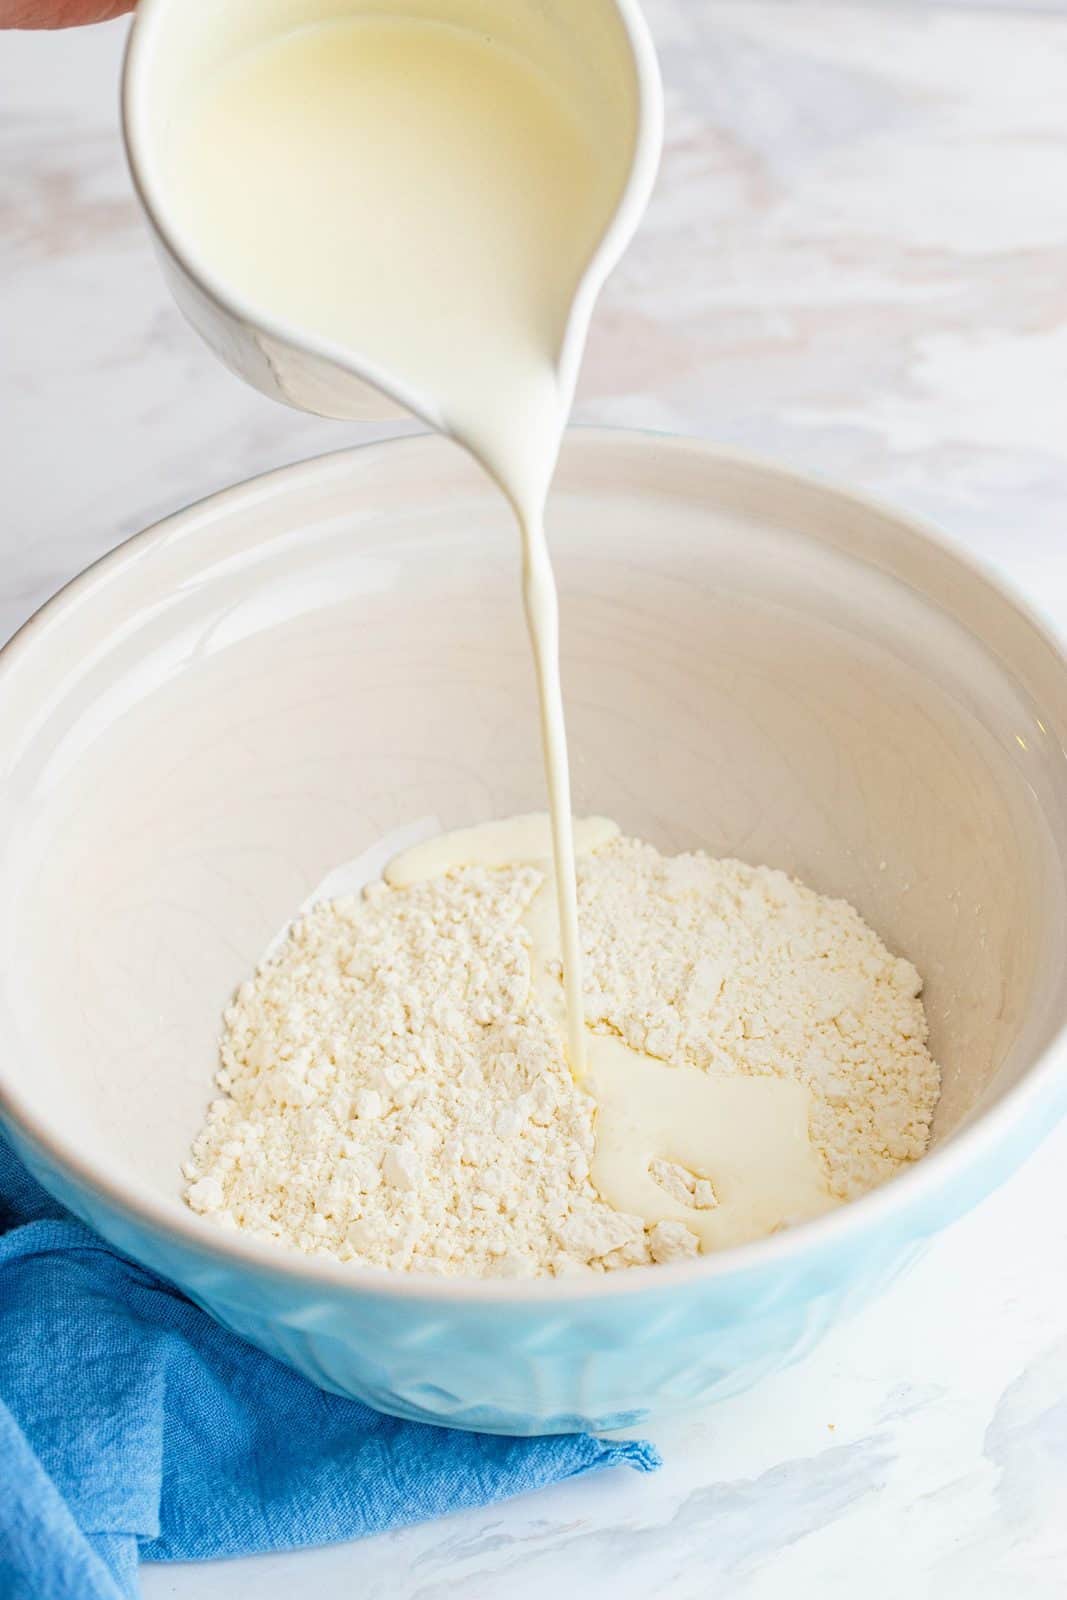 pouring heavy cream into white bowl that has self-rising flour in it.